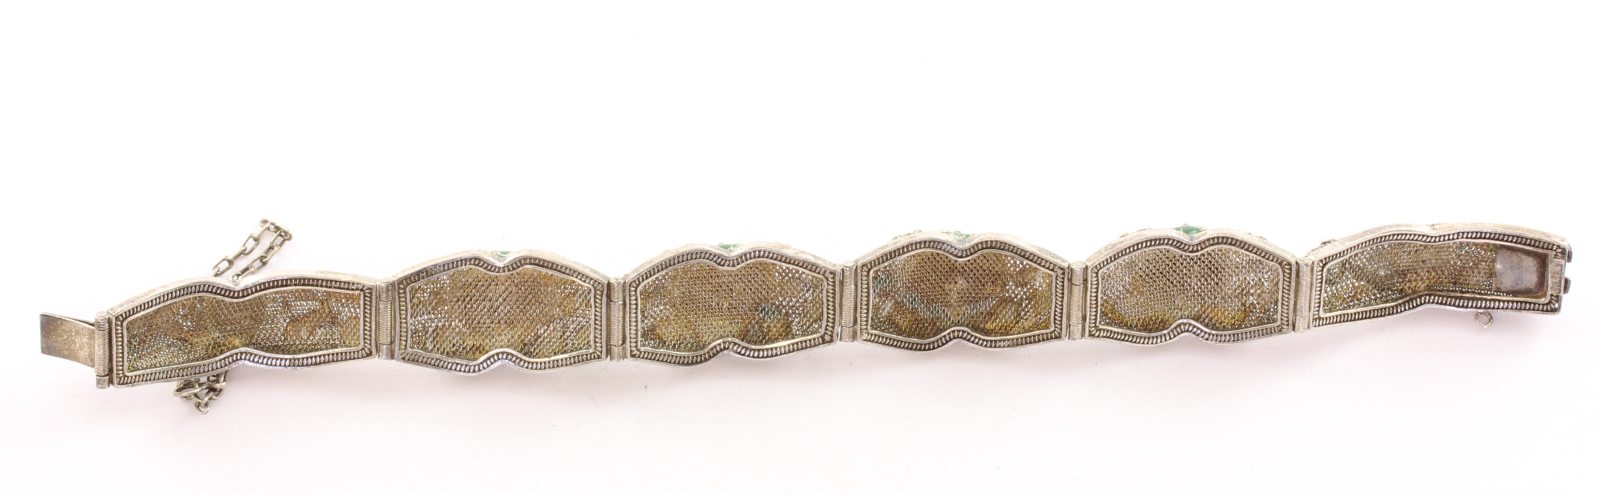 Armband, Silber Emaille, Tigerauge, China - Image 2 of 2